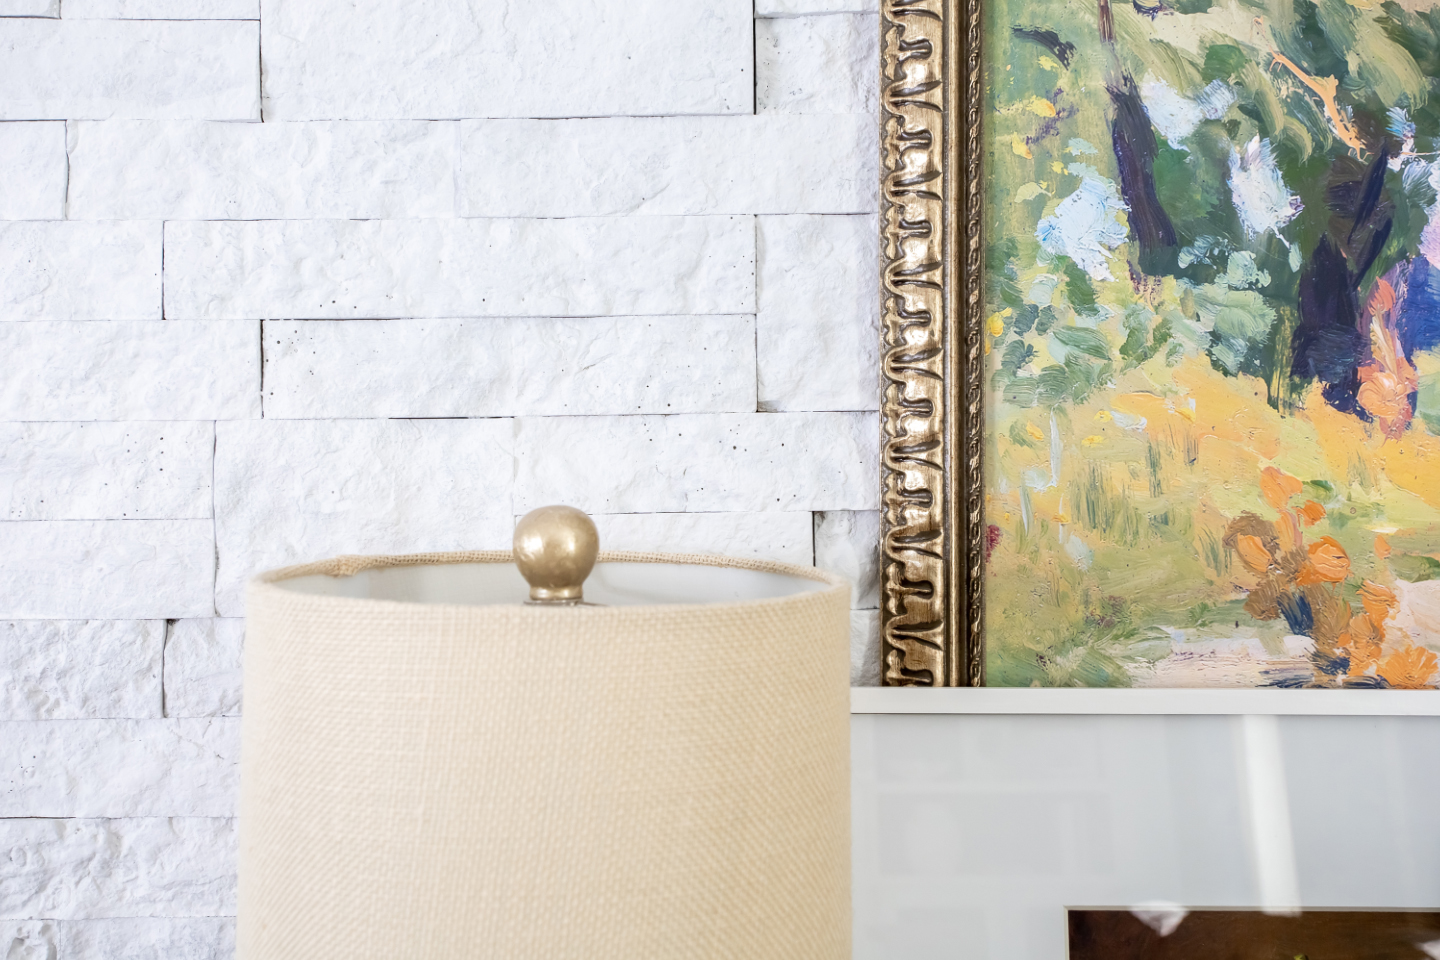 In today's post I'll share the details of how I whitewashed the faux stone wall behind my new desk nook to brighten up the whole space. Here's how to whitewash a stone wall.